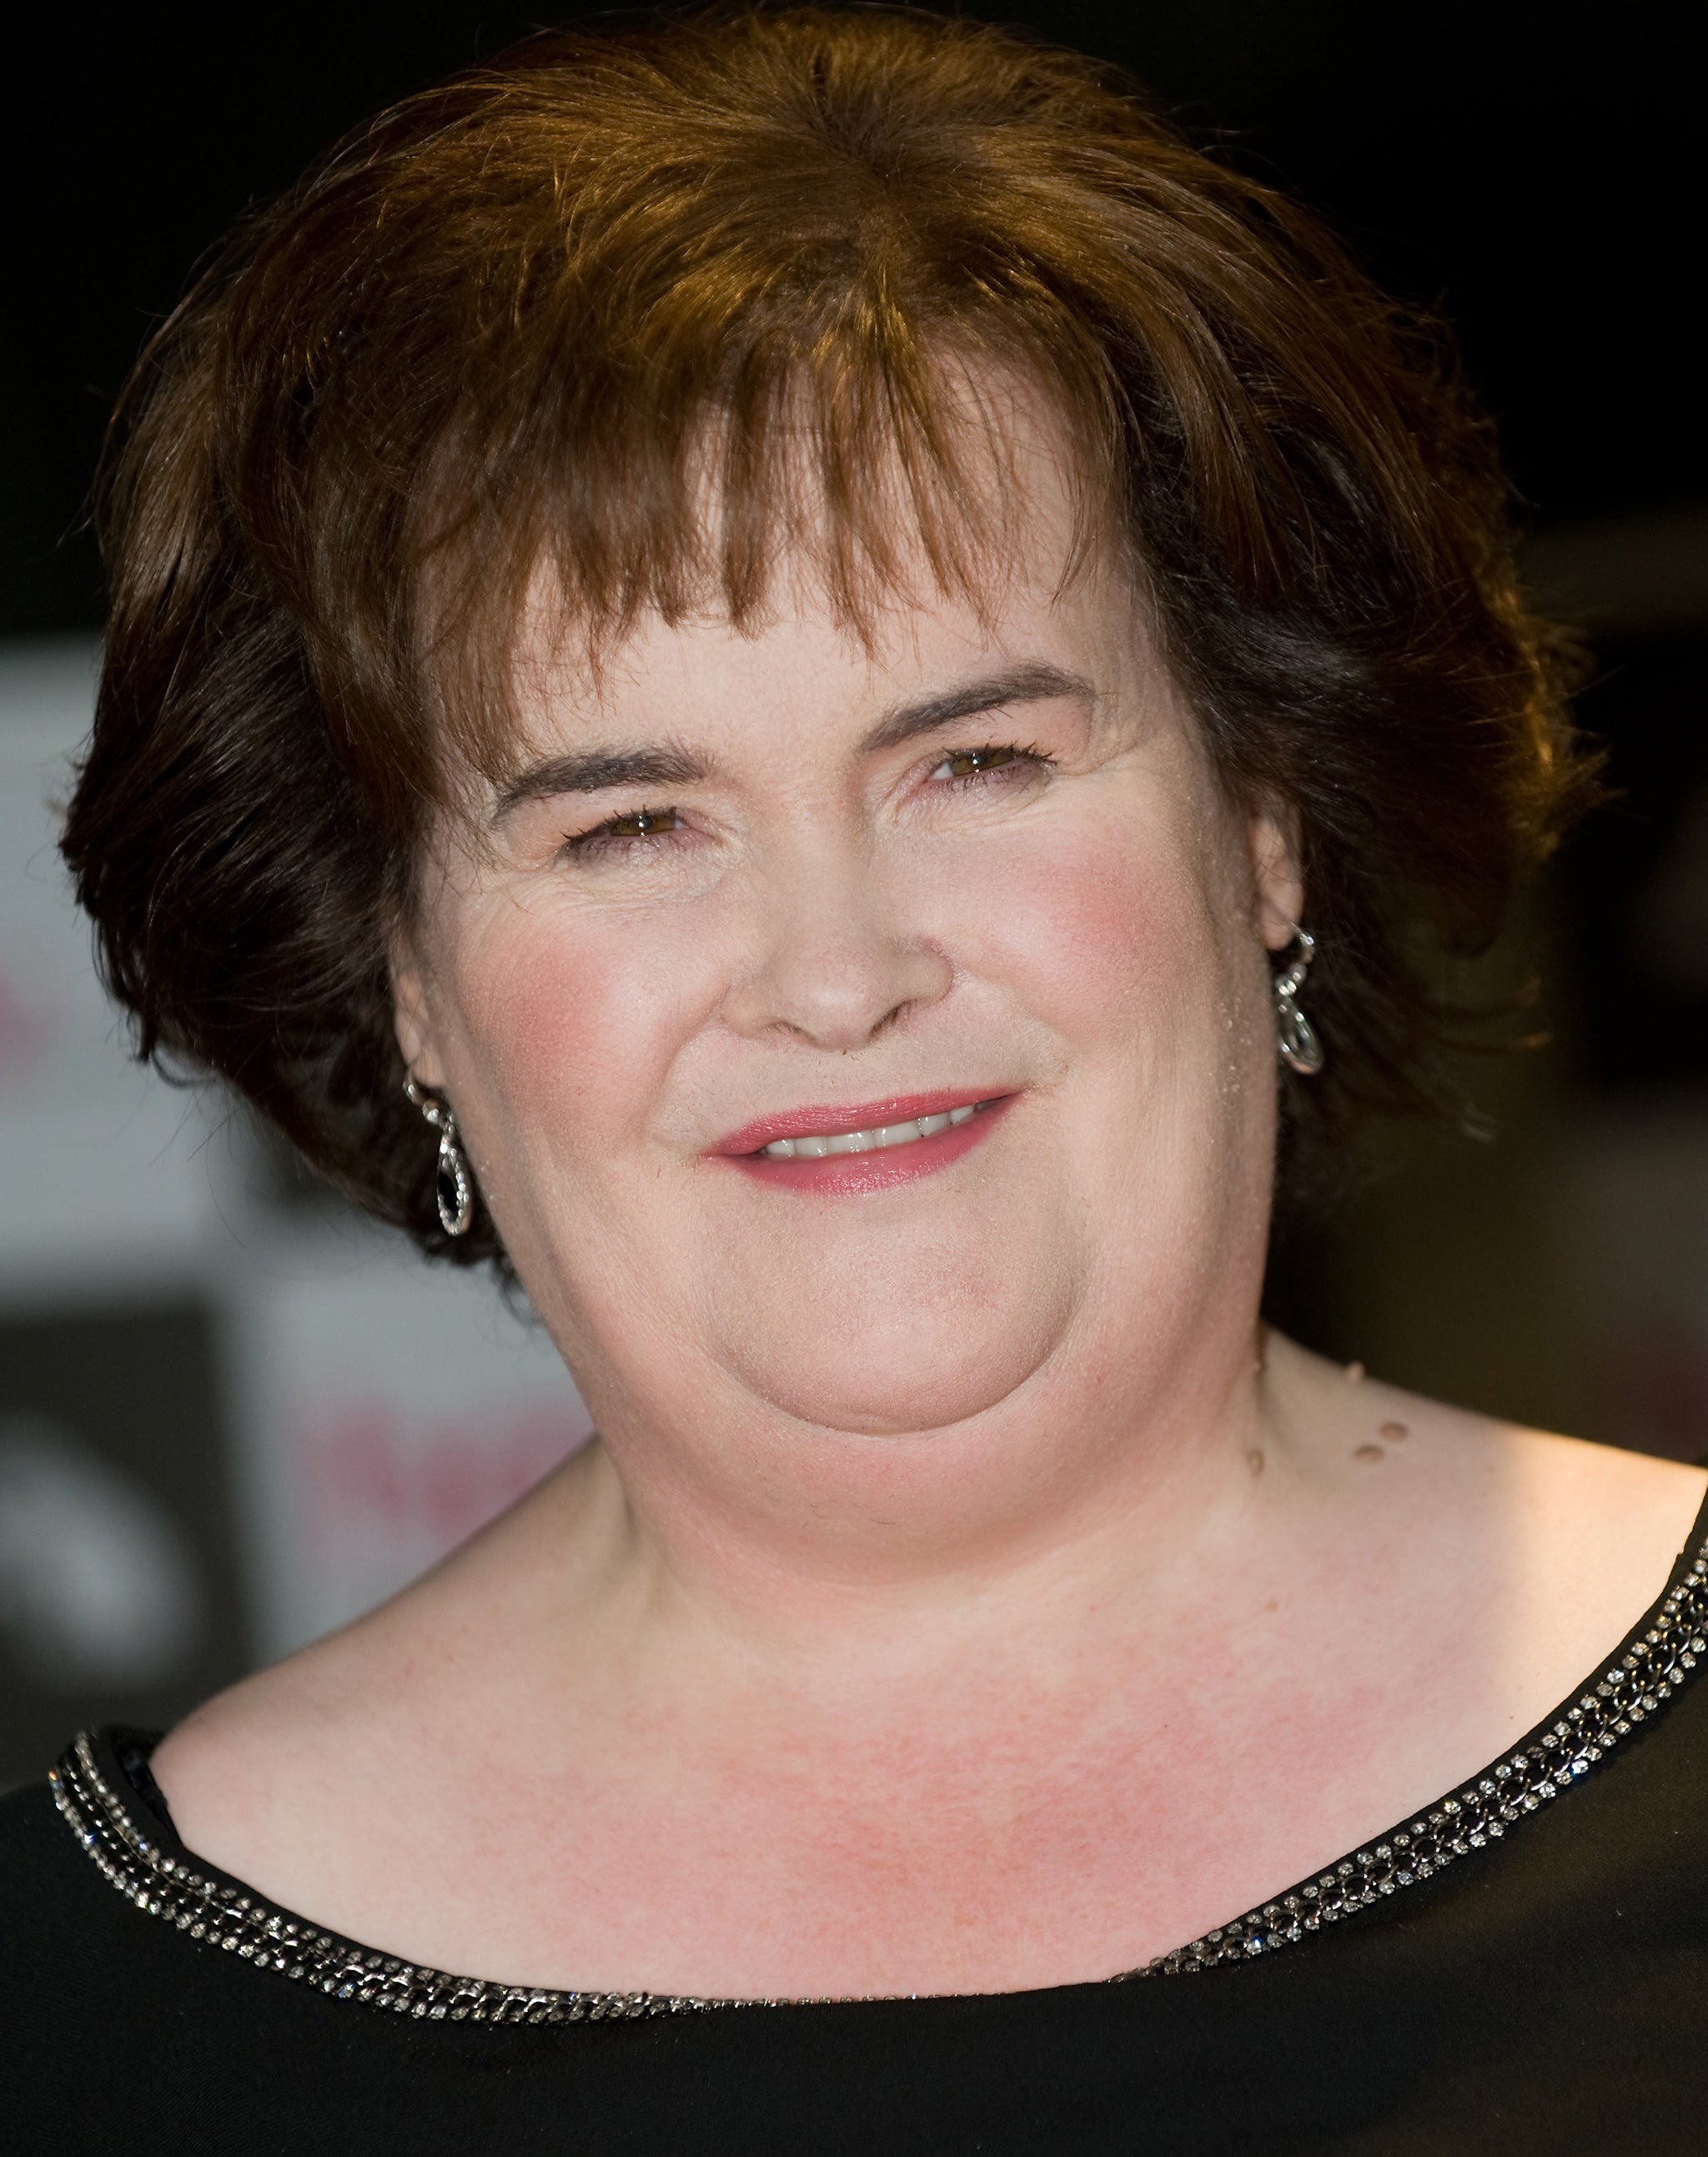 Susan Boyle is to duet with Elvis Presley